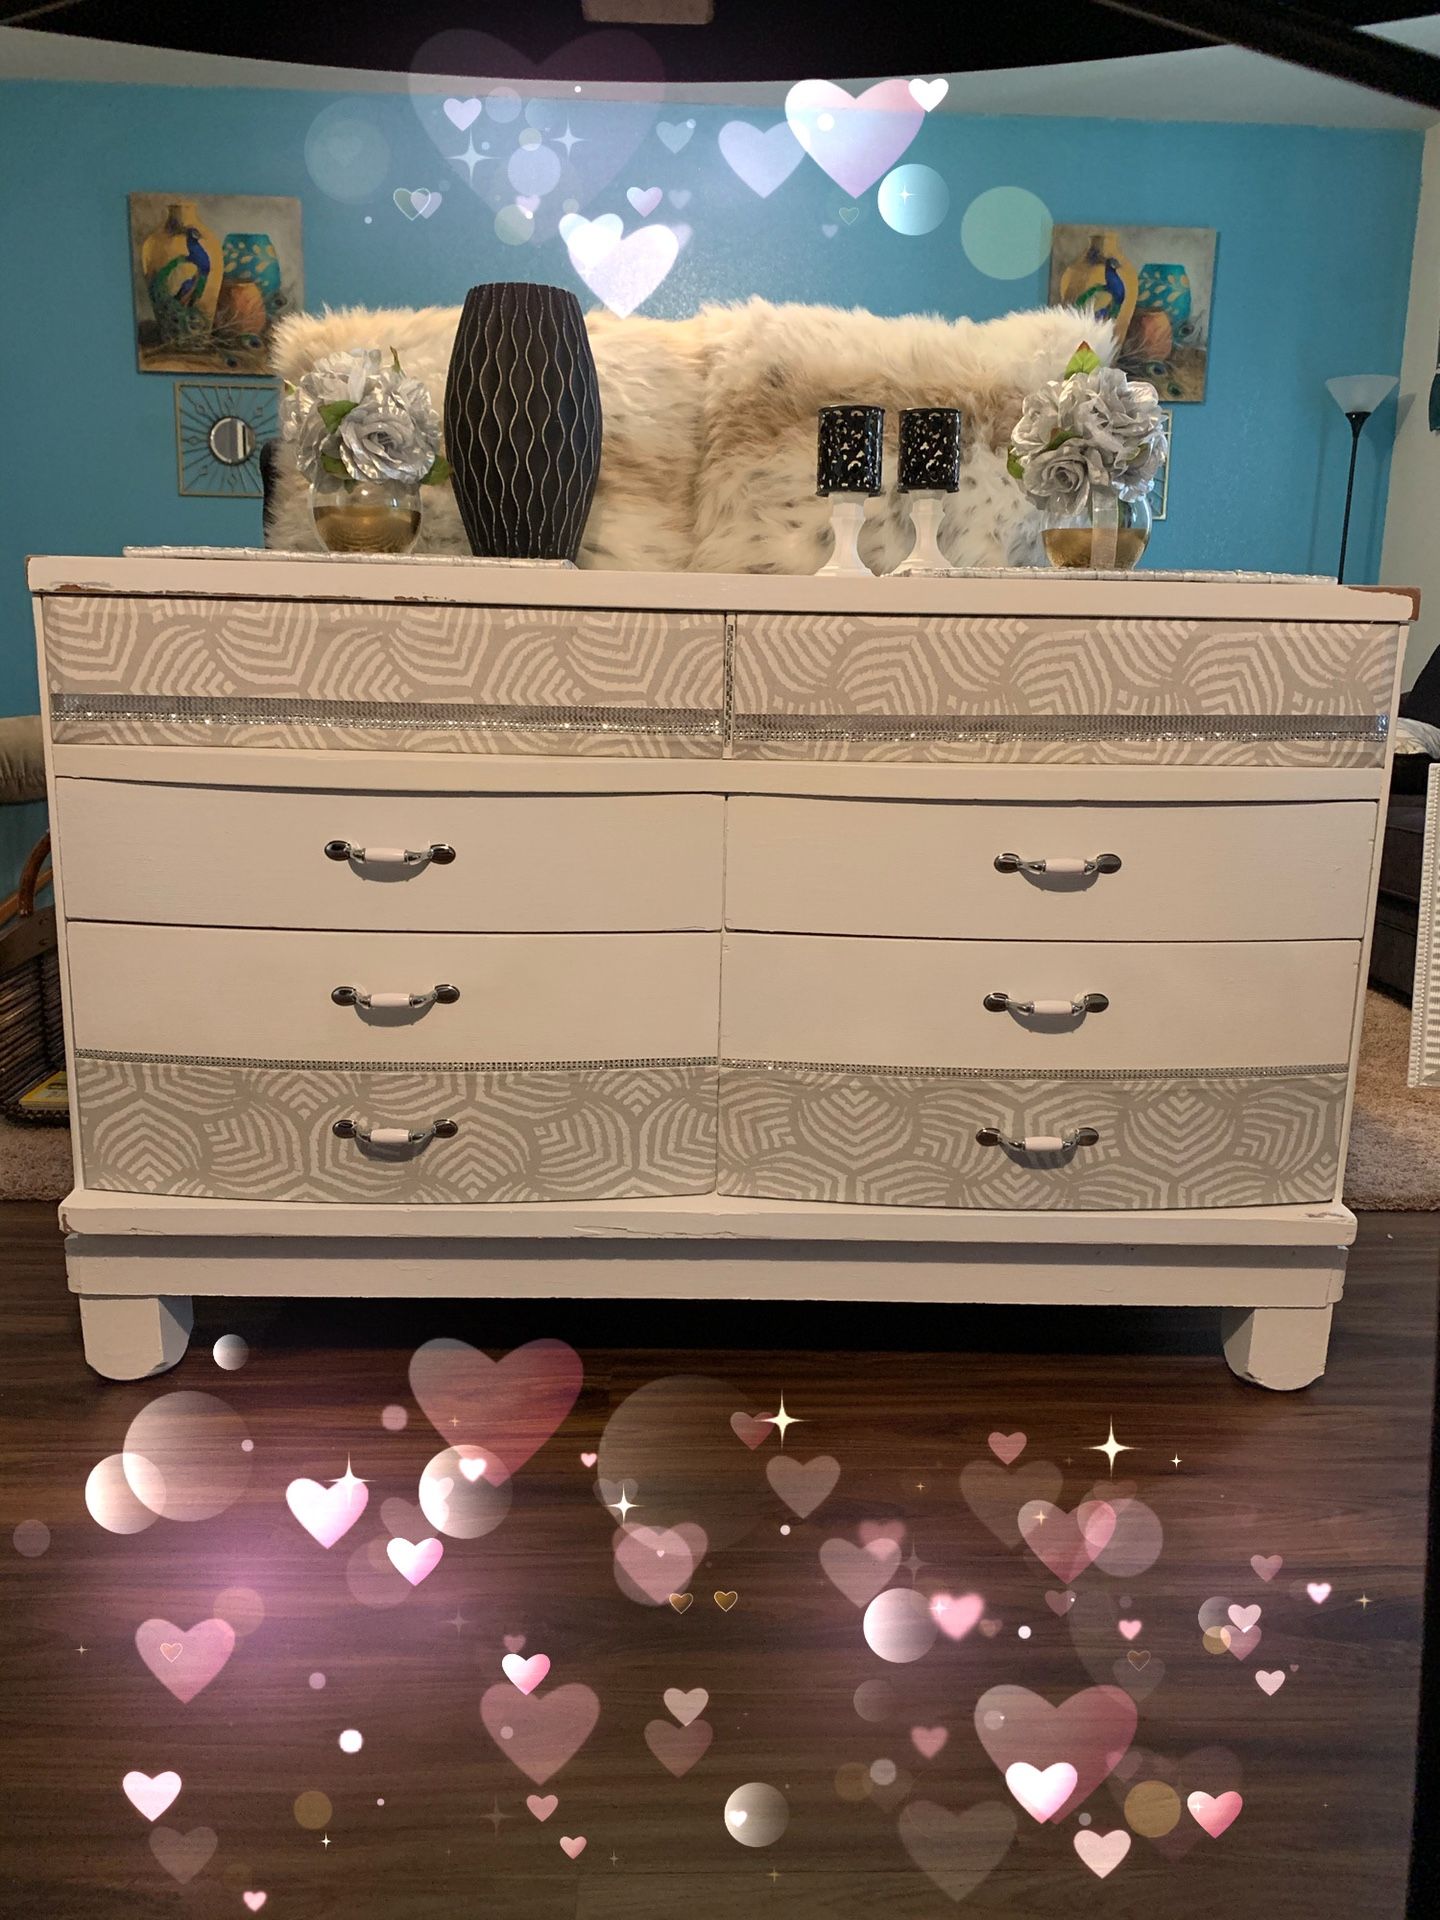 The most beautiful milky vintage dresser credenza